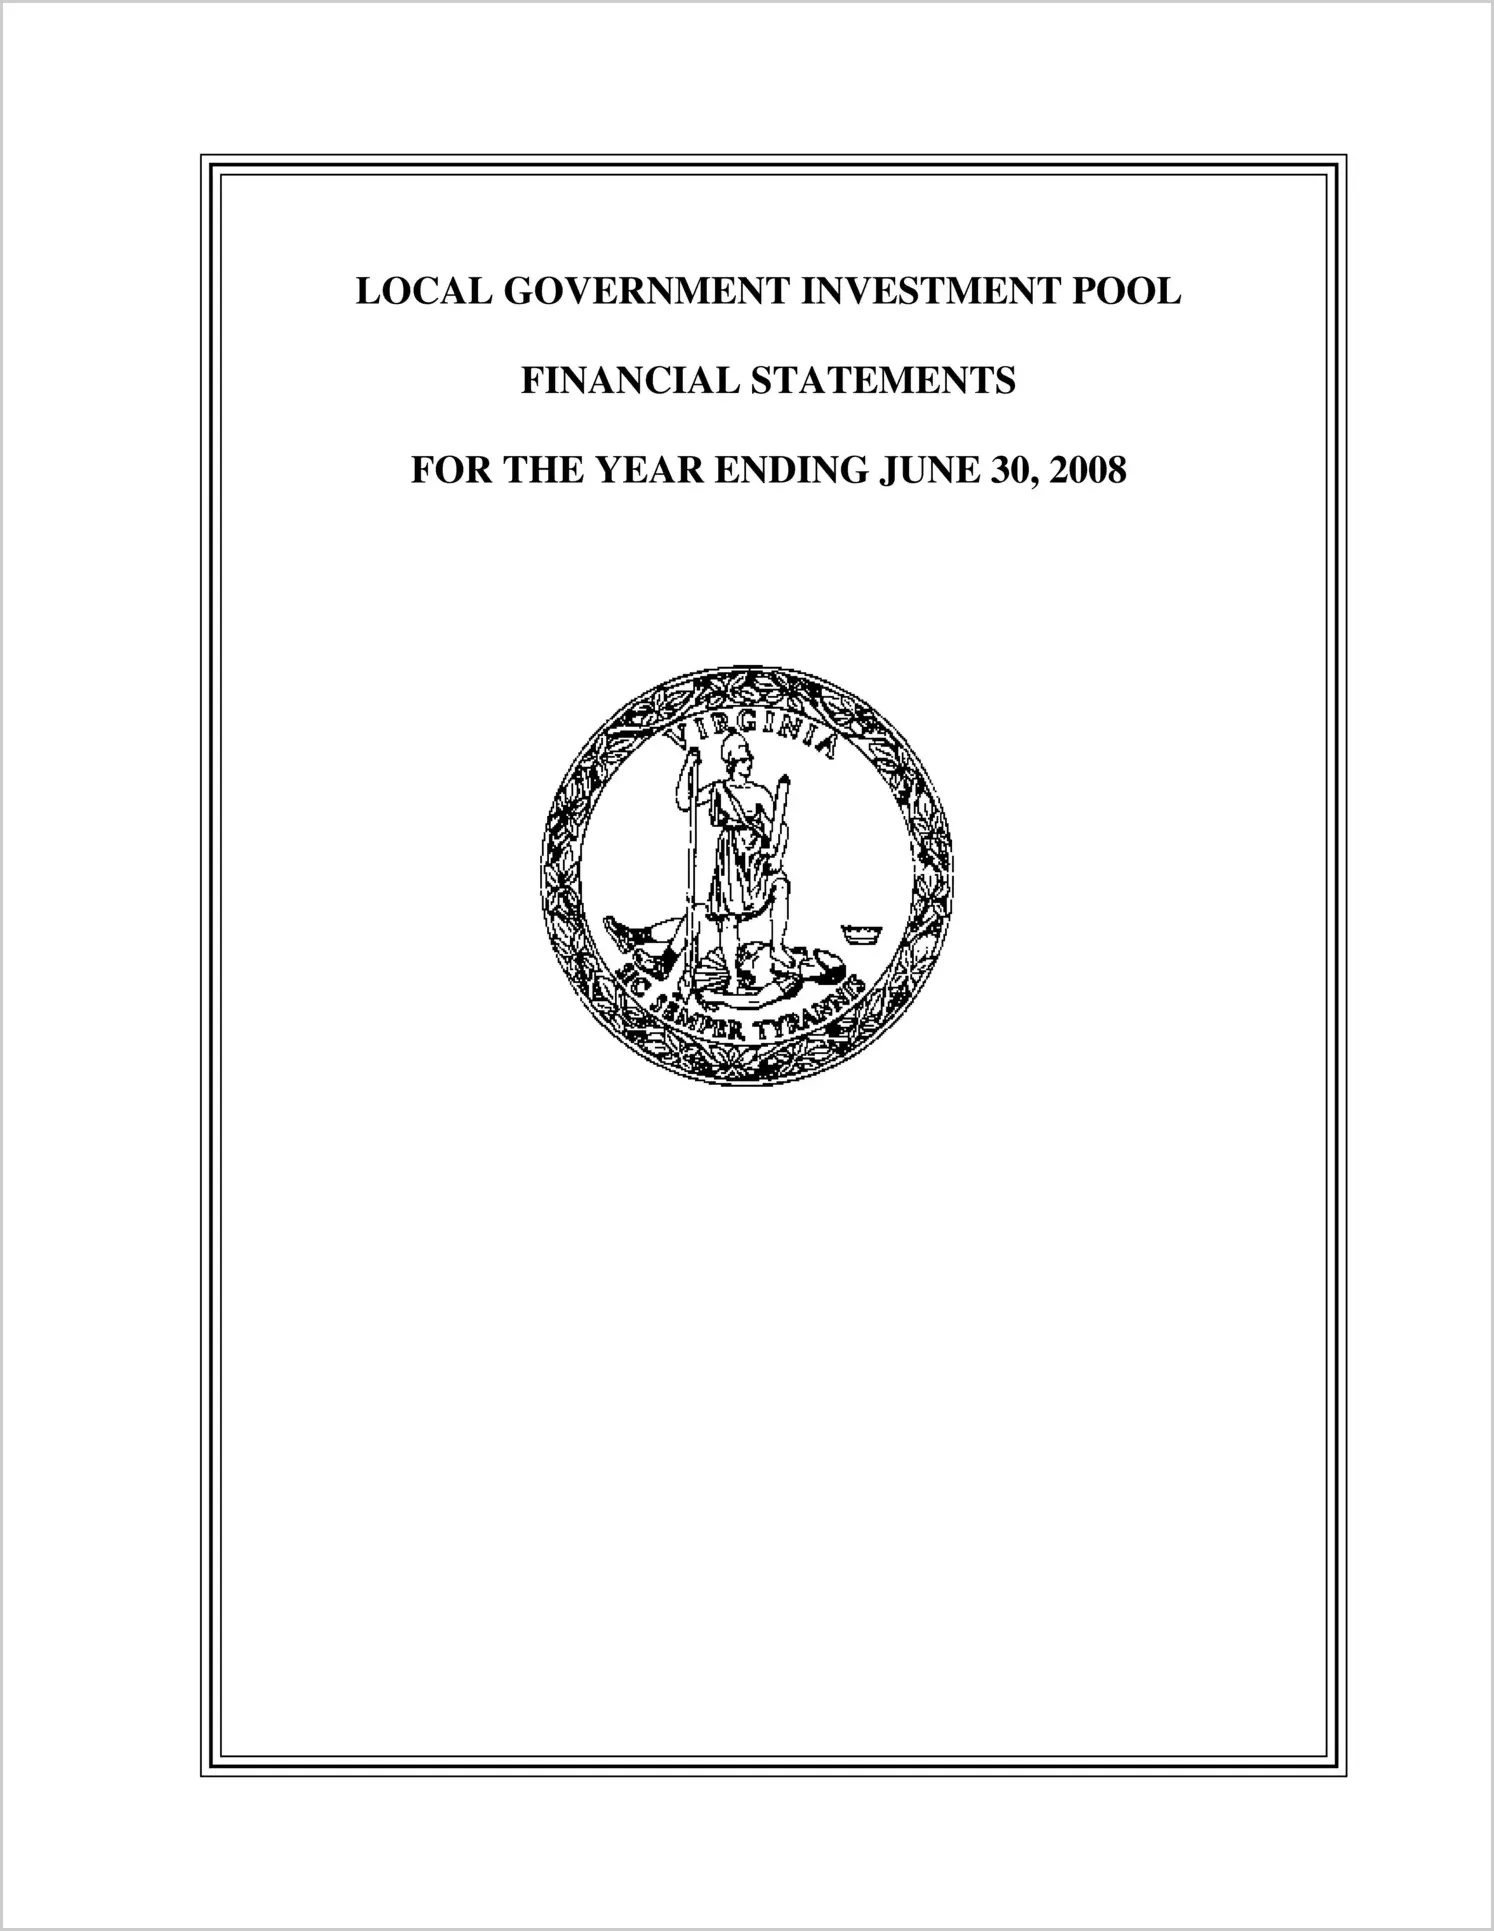 Local Government Investment Pool Financial Statements for the year ended June 30, 2008